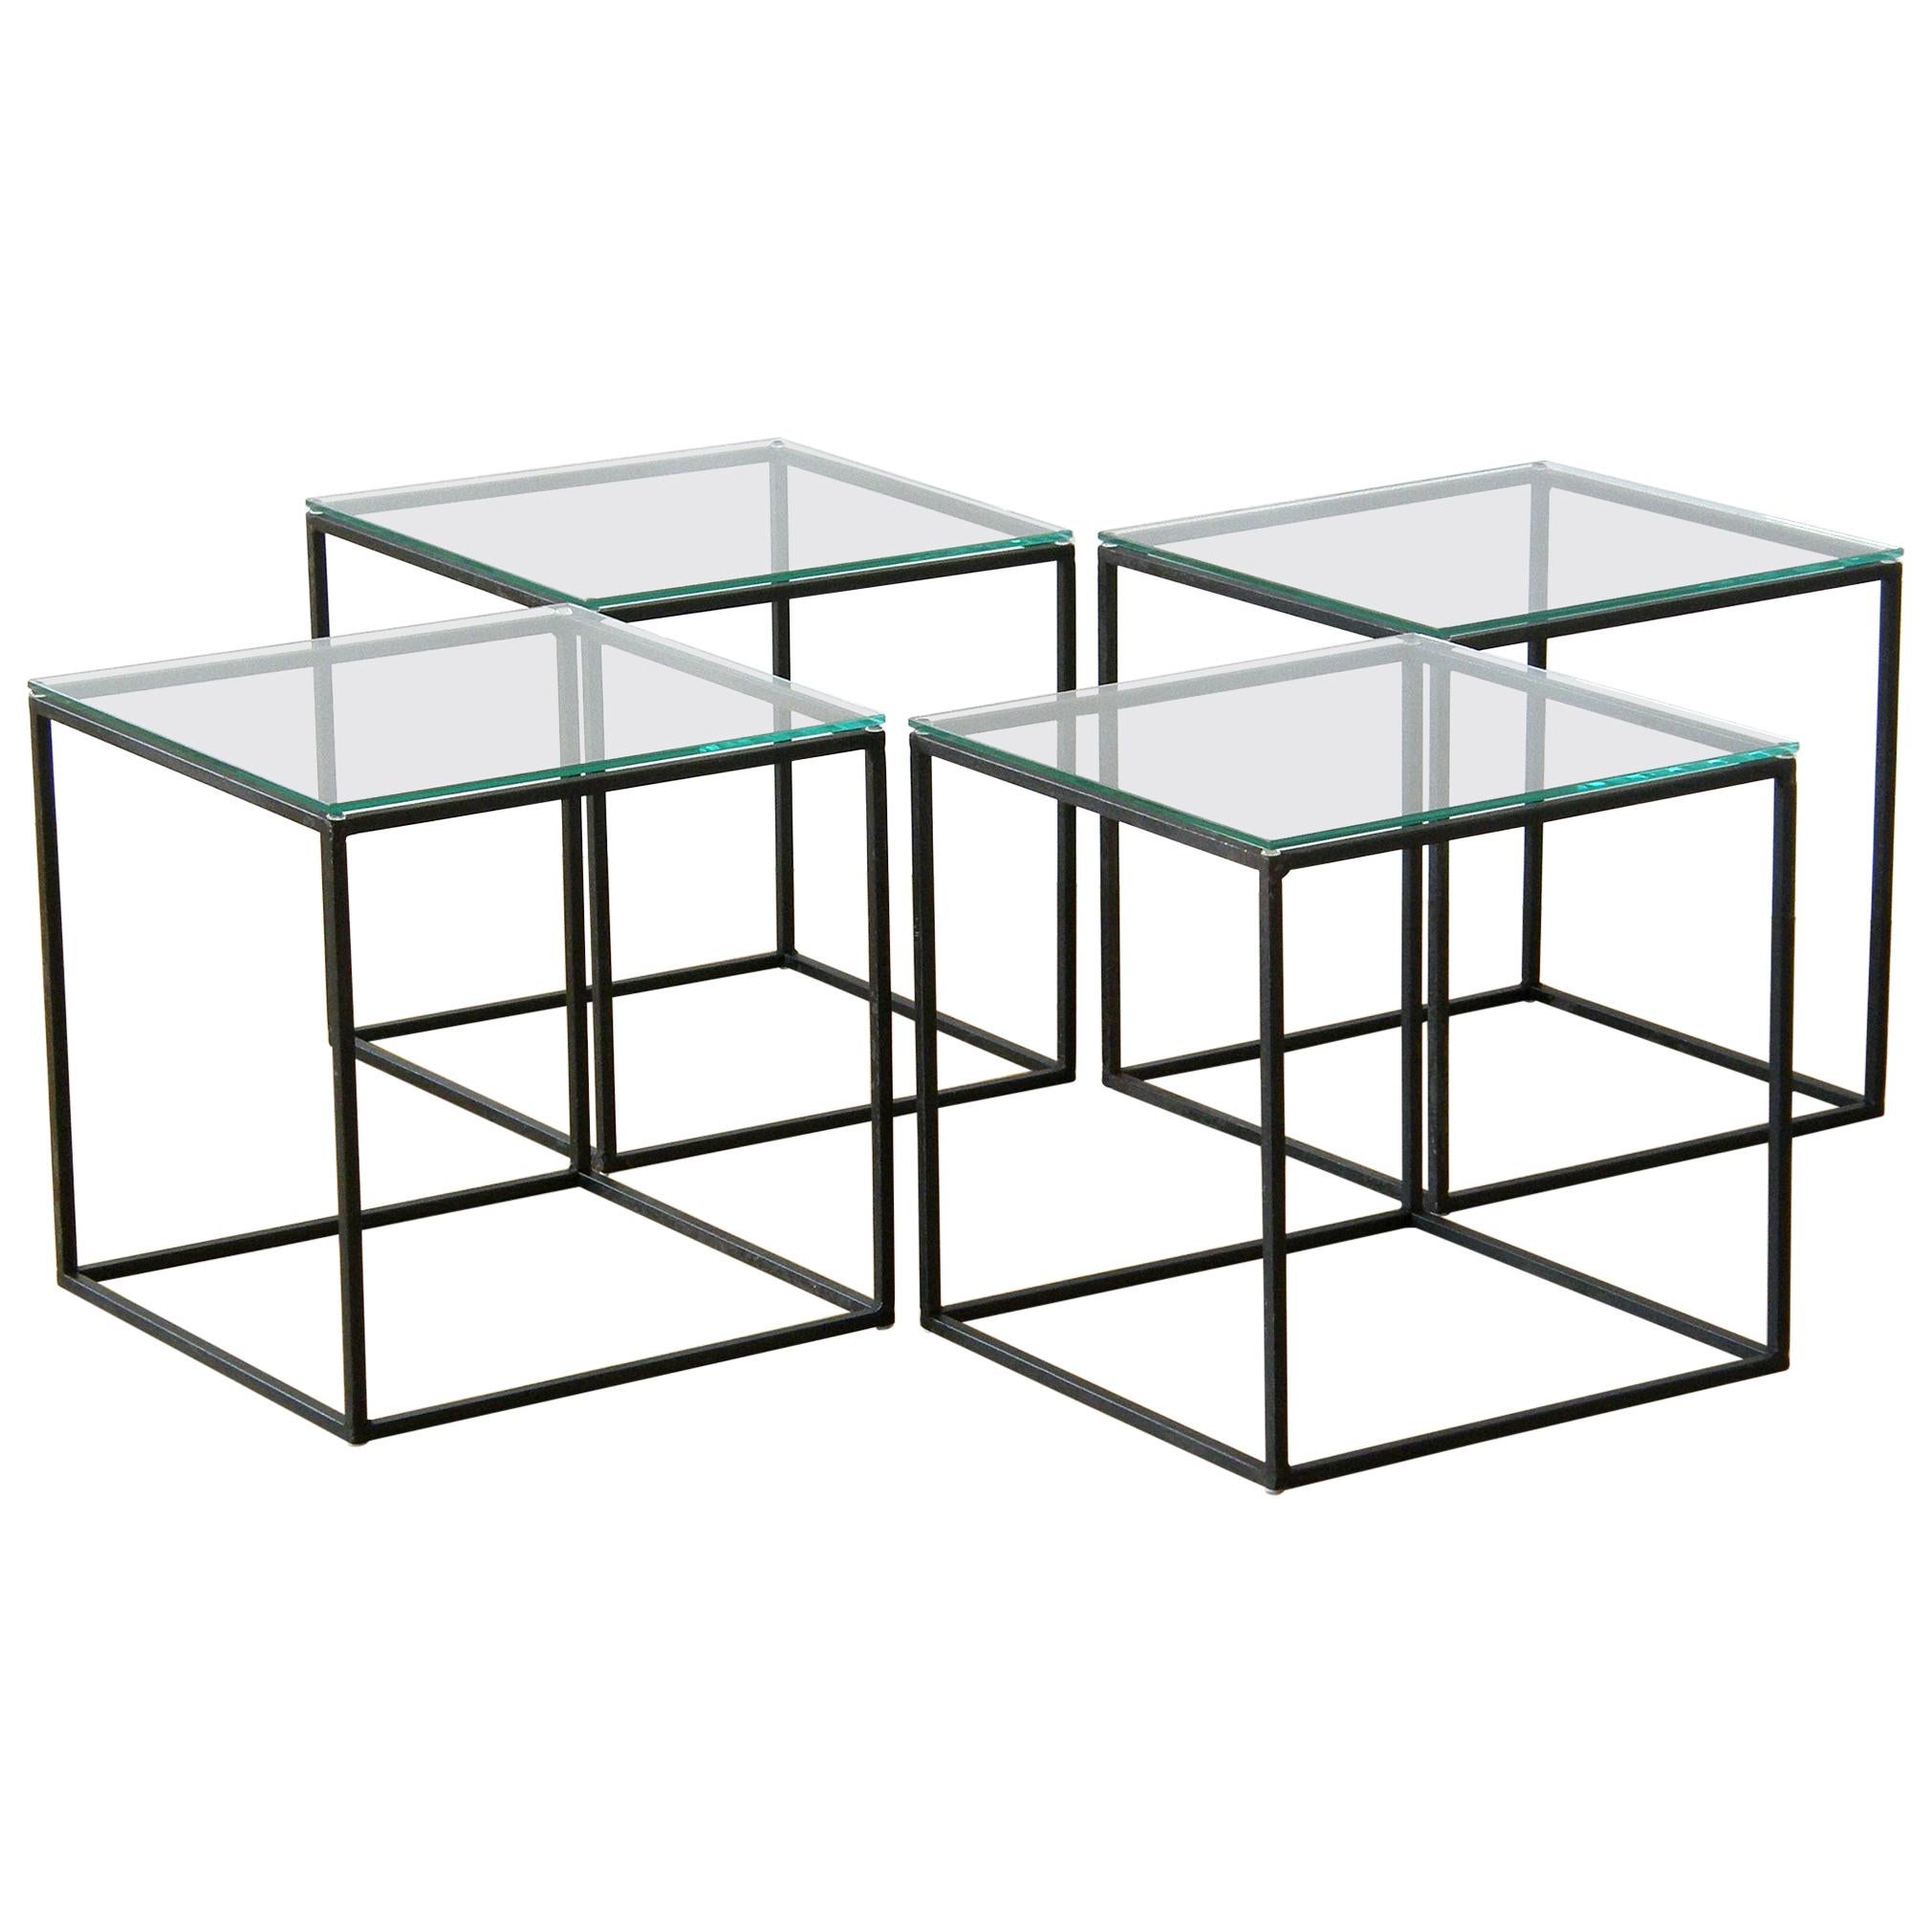 Set of Four Cube Coffee or Side Tables with Iron Frames and Glass Tops